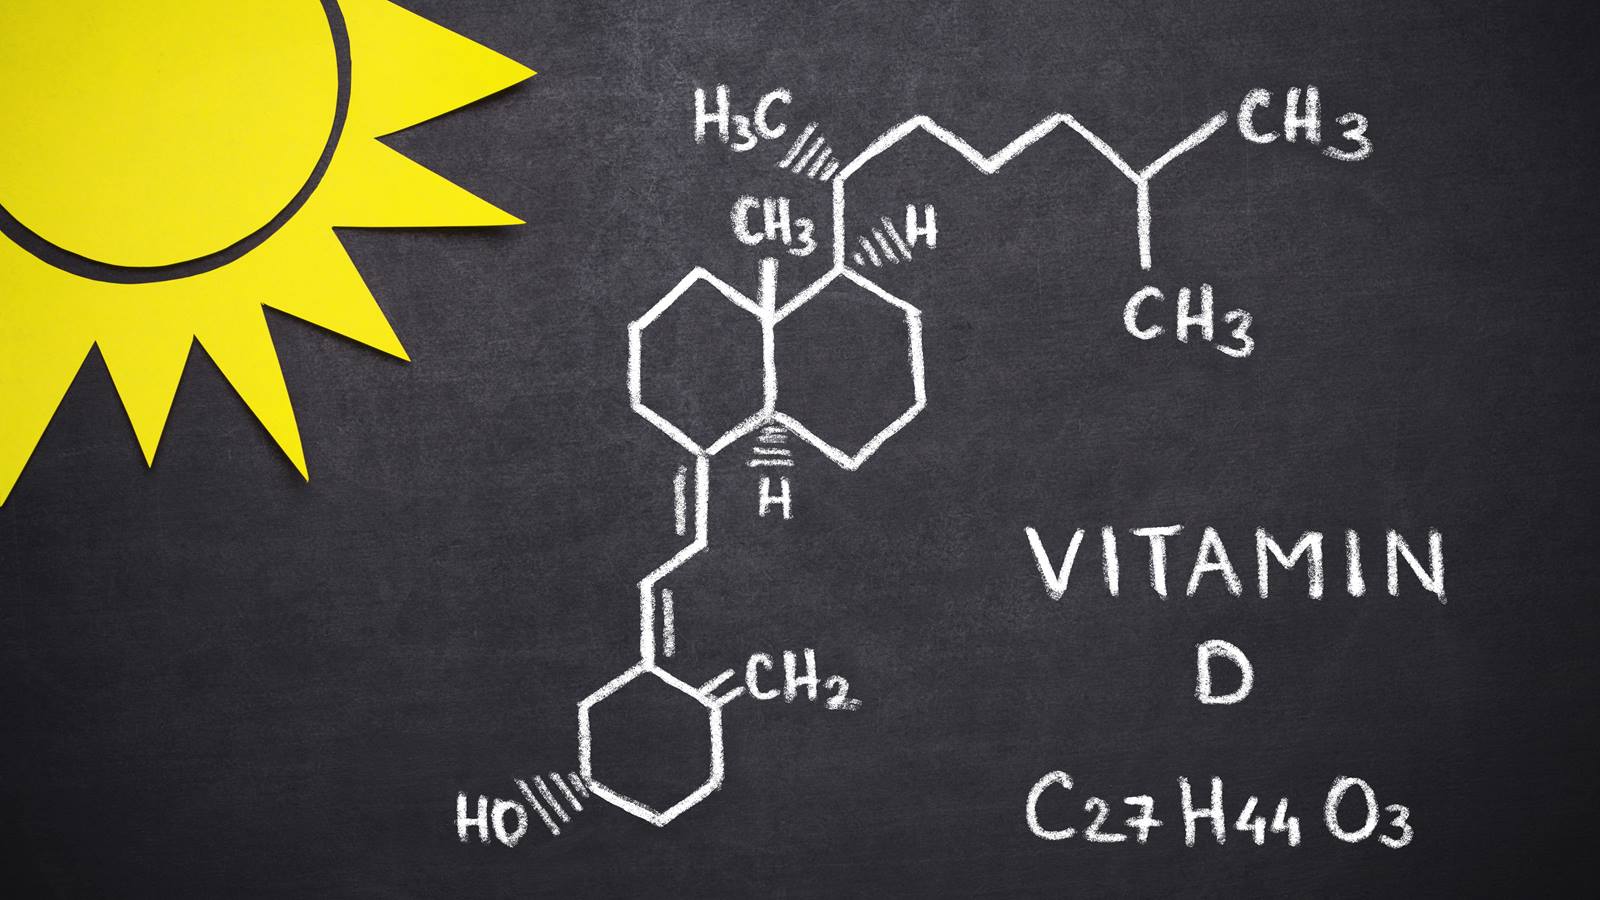 Vitamin D is the rage these days, but does it improve your bone health?